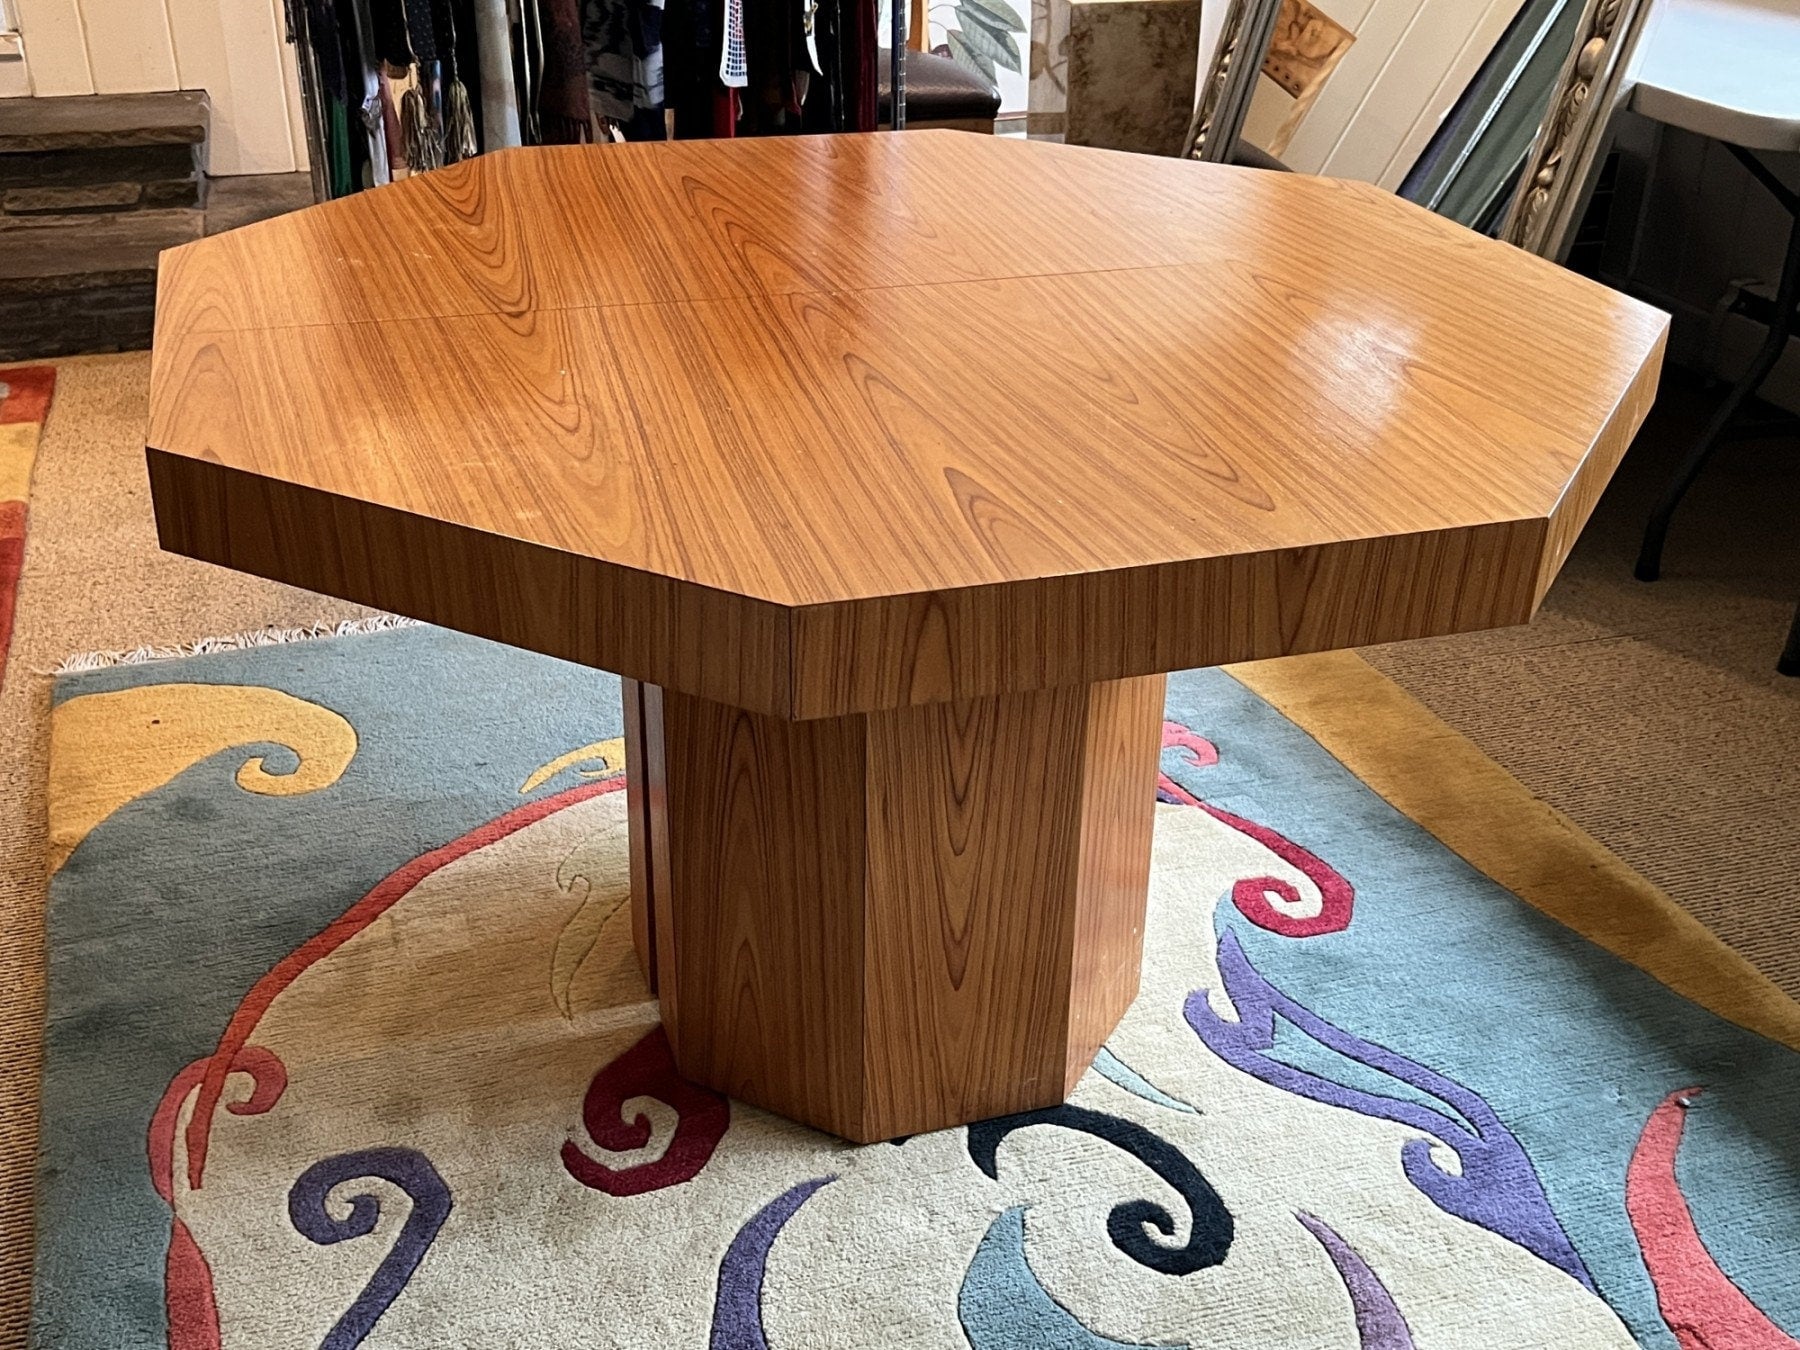 Italian Mid-Century Hexagonal Dining Table | Shipping NOT Free | Vintage MCM Extendable Drop Leaf Table | Dining Room Furniture